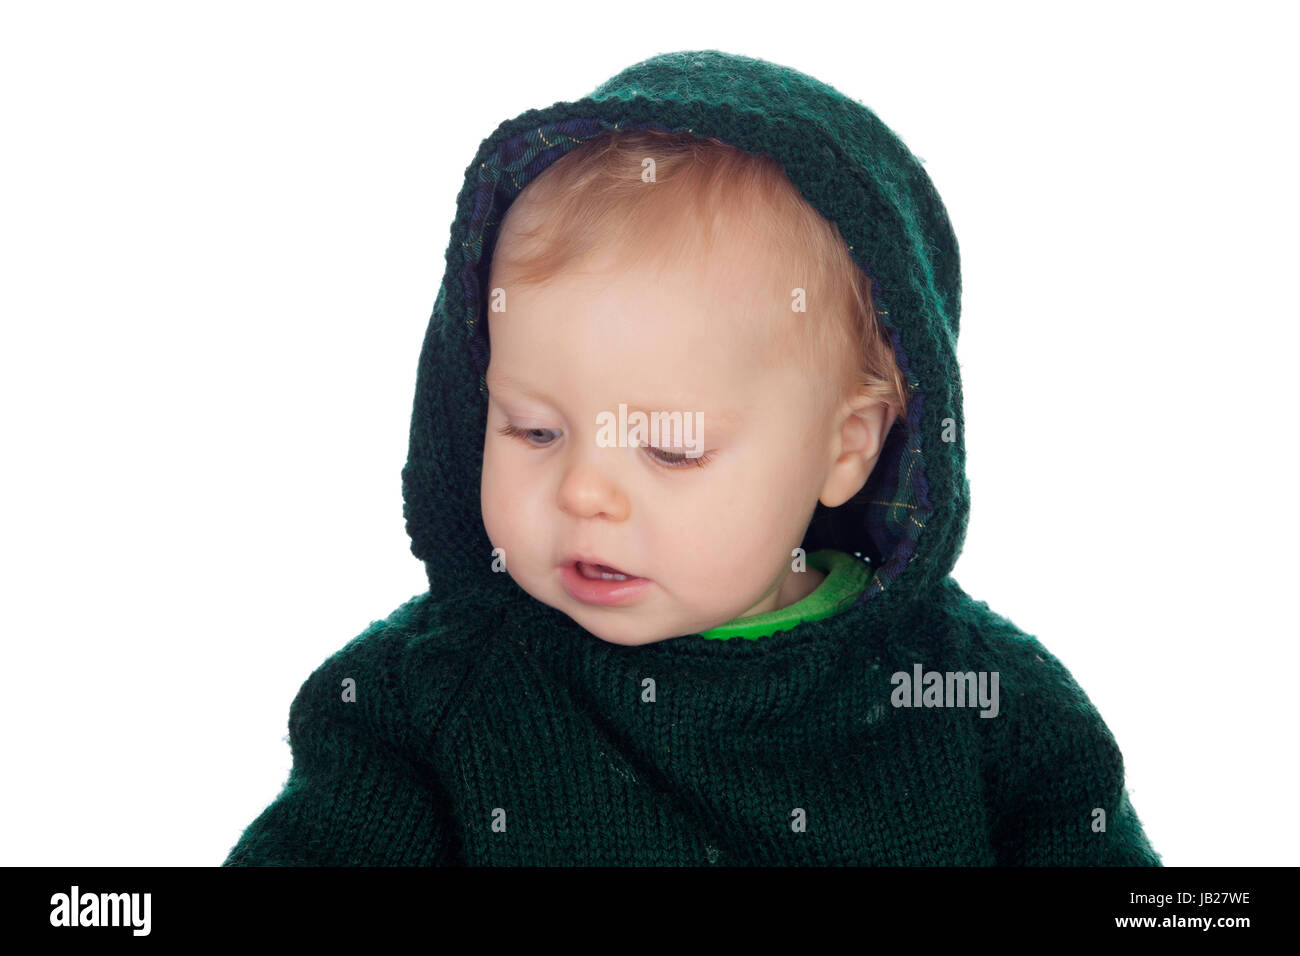 Adorable blond baby with wool jersey hoodie covering his head isolated on a white background Stock Photo